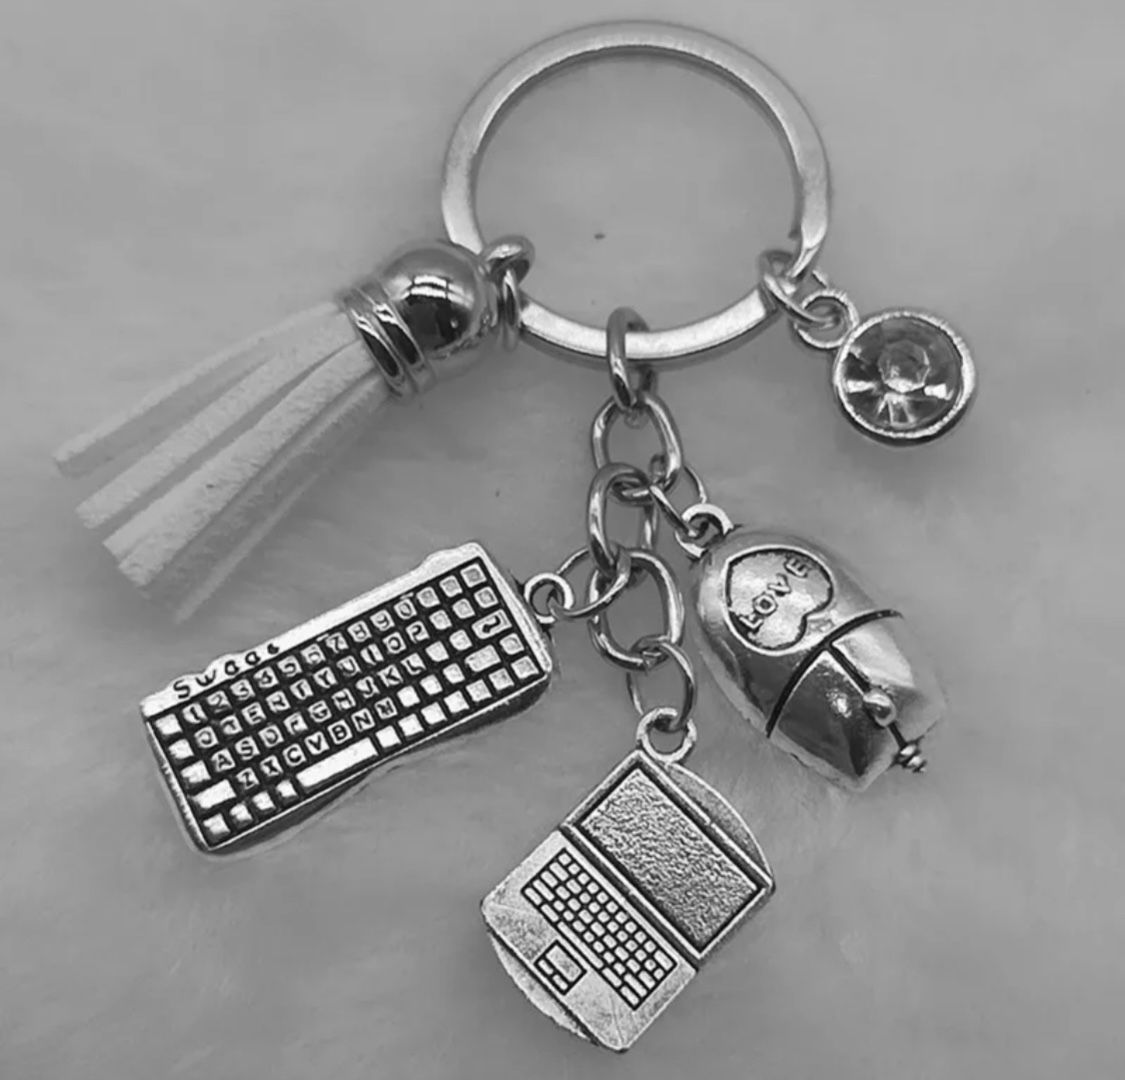 Brand New Office Assistant Secretary Manager Charms Keychain Gift - White Tassel 